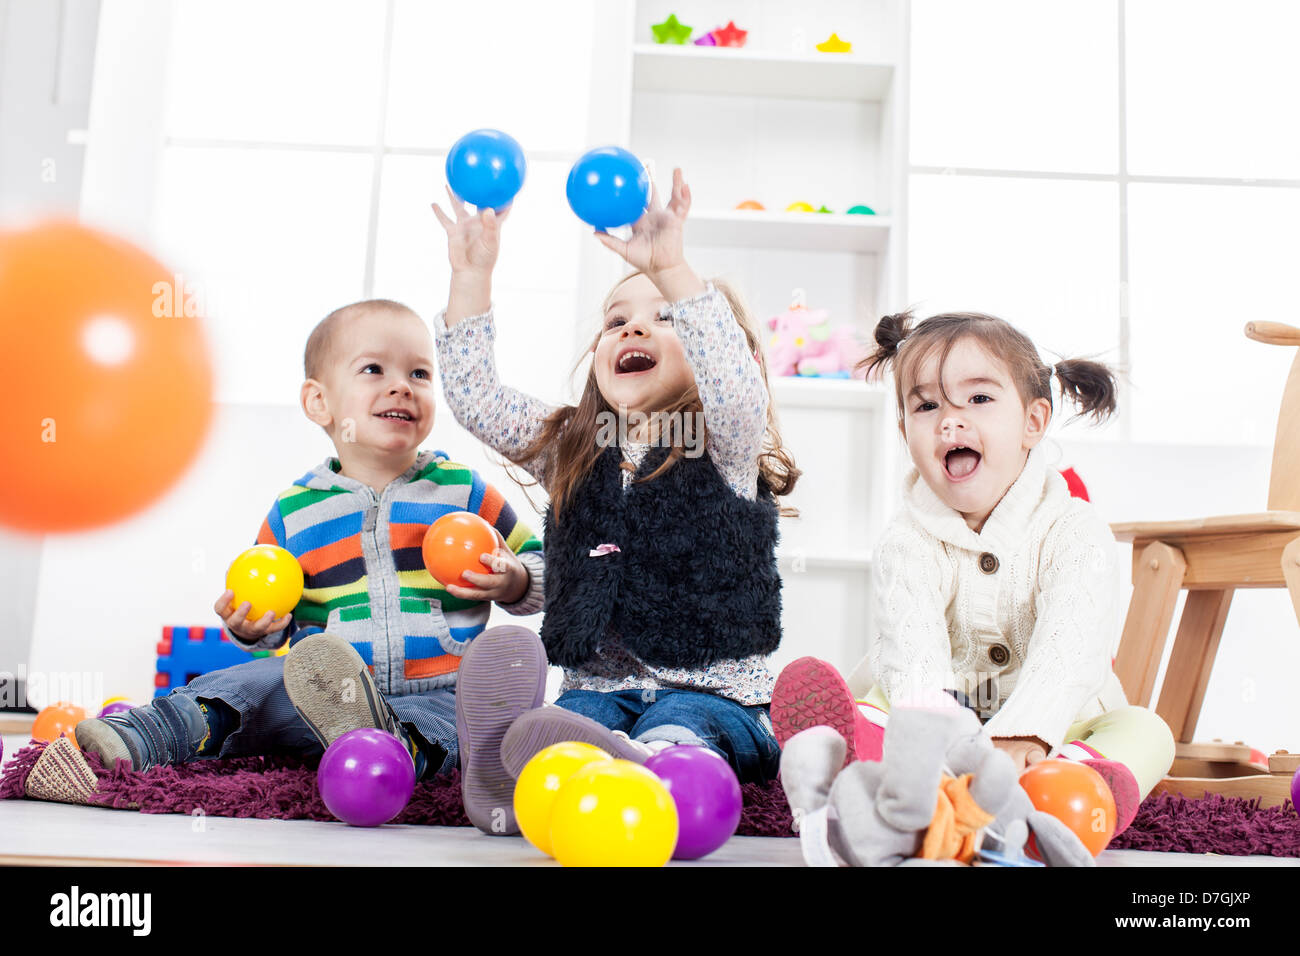 Cute kids playing in the room Stock Photo